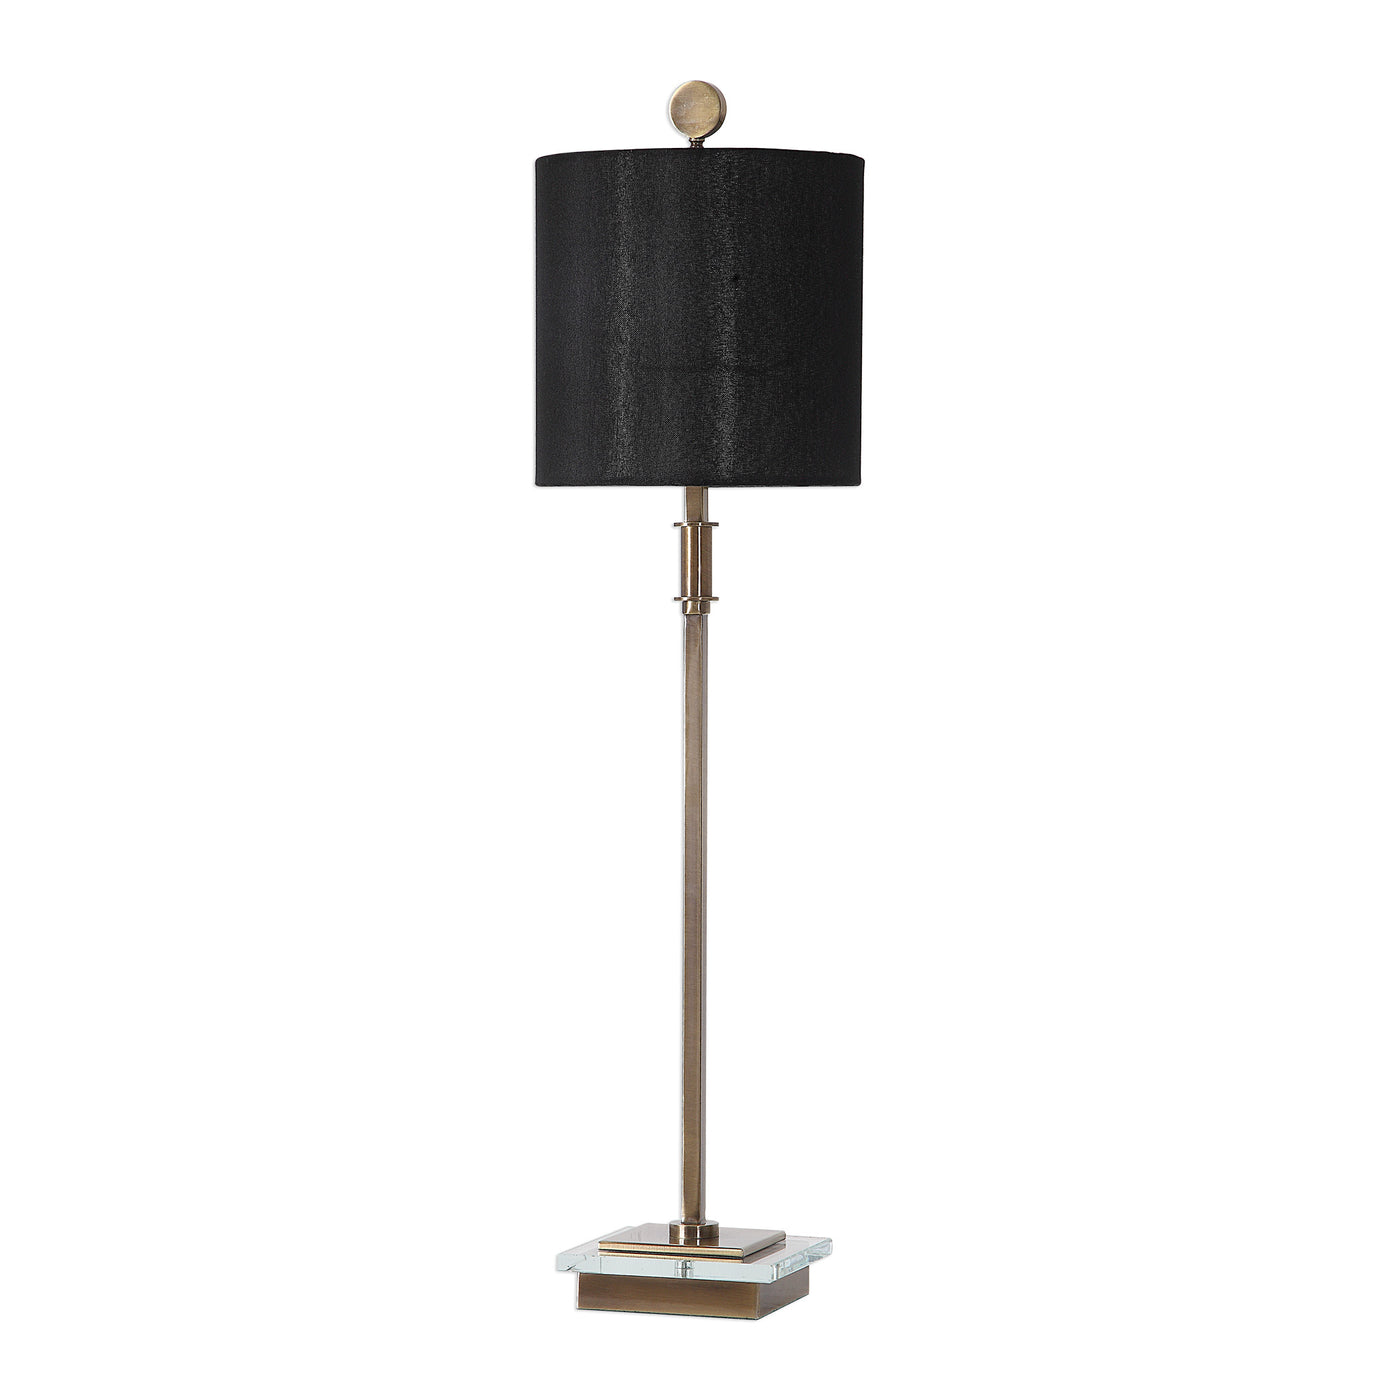 Sleek, Modern Lines Complete This Sophisticated Design Featuring A Delicate Iron Base Finished In A Plated Antique Brass, ...